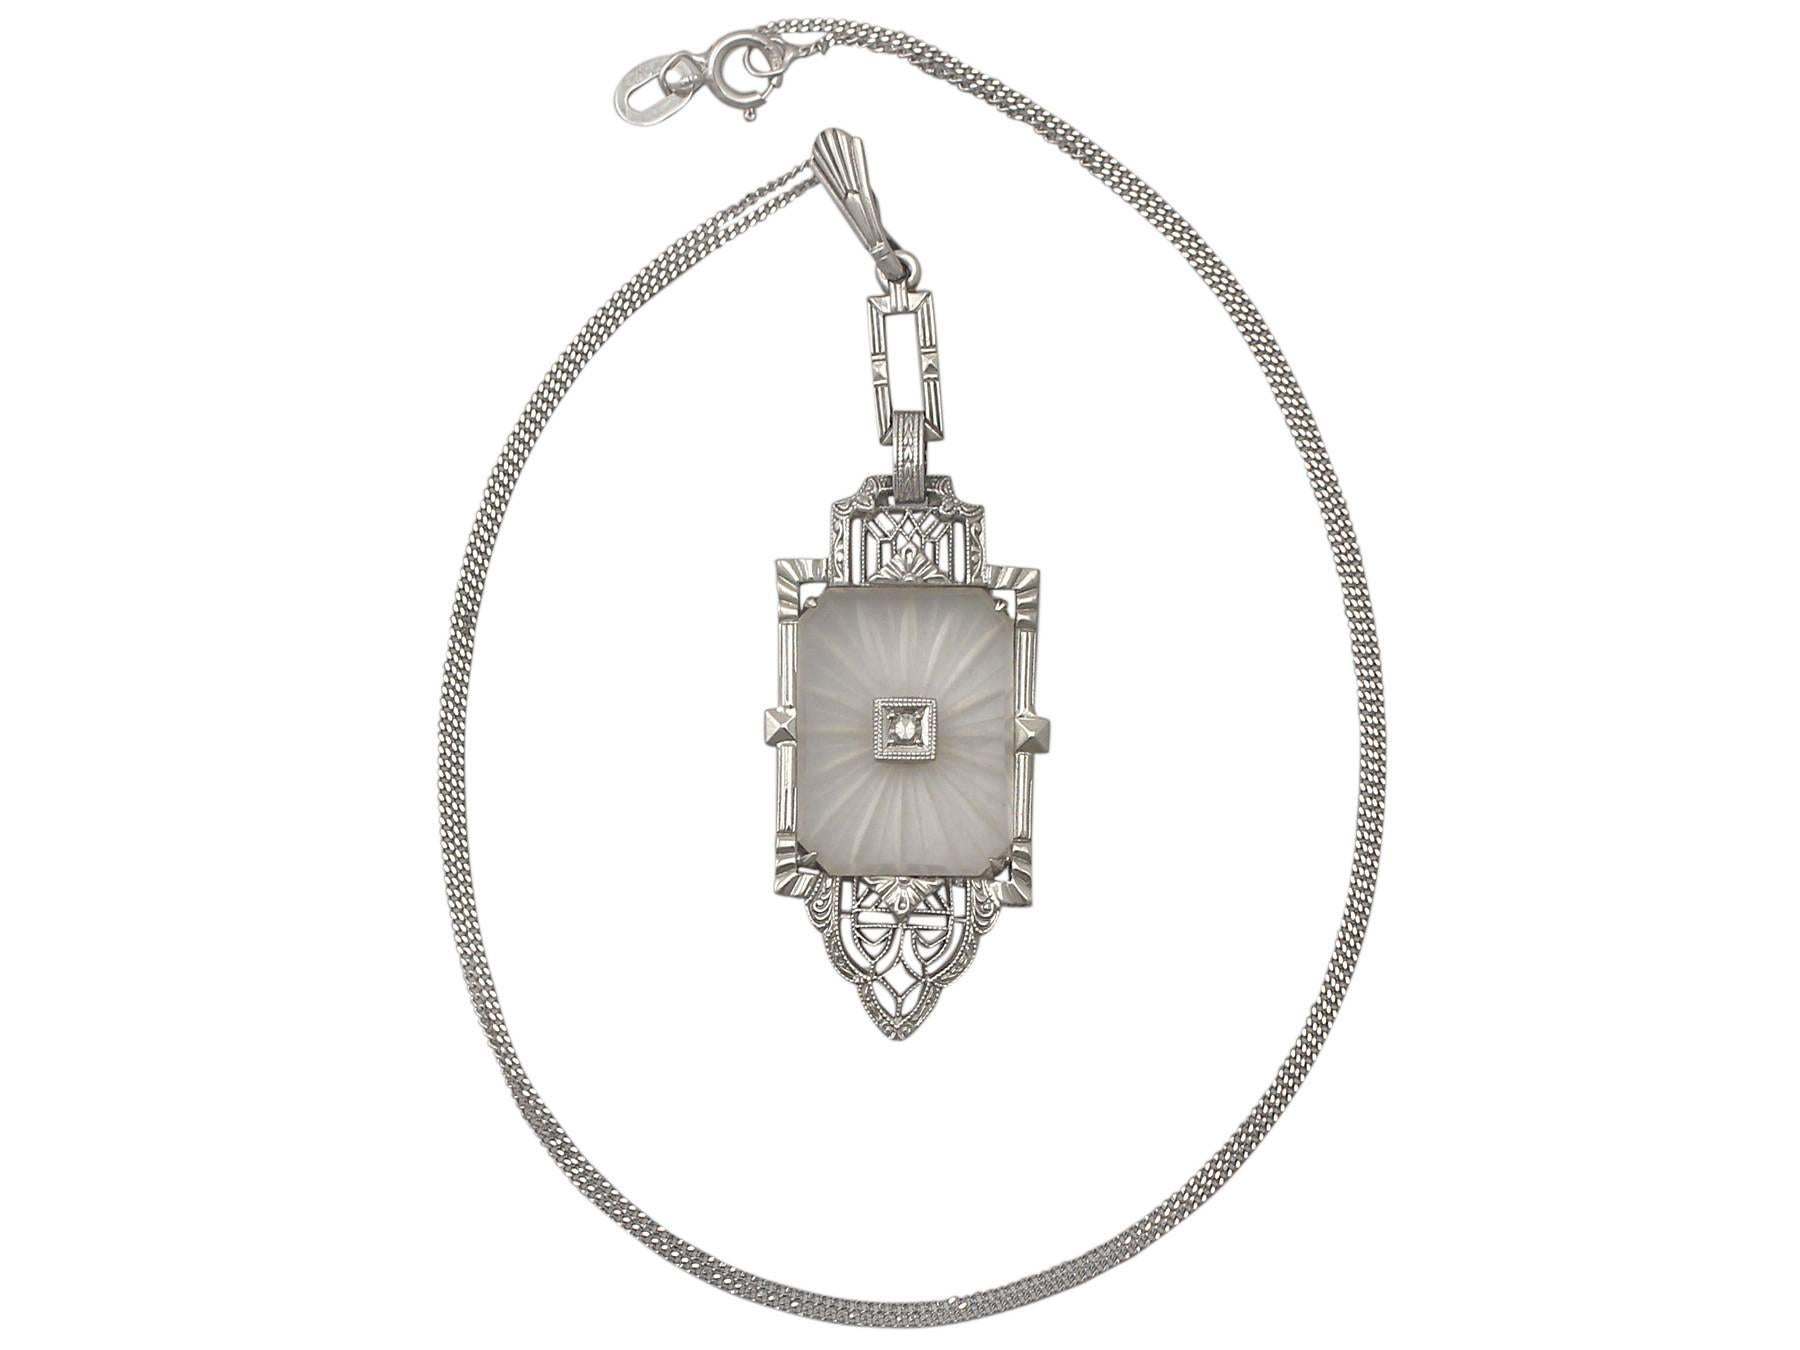 A fine and unusual antique 0.02 carat diamond and crystal, 14 karat white gold Art Deco pendant; part of our diverse antique jewelry and estate jewelry collections

This fine and impressive antique pendant has been crafted in 14k white gold.

The